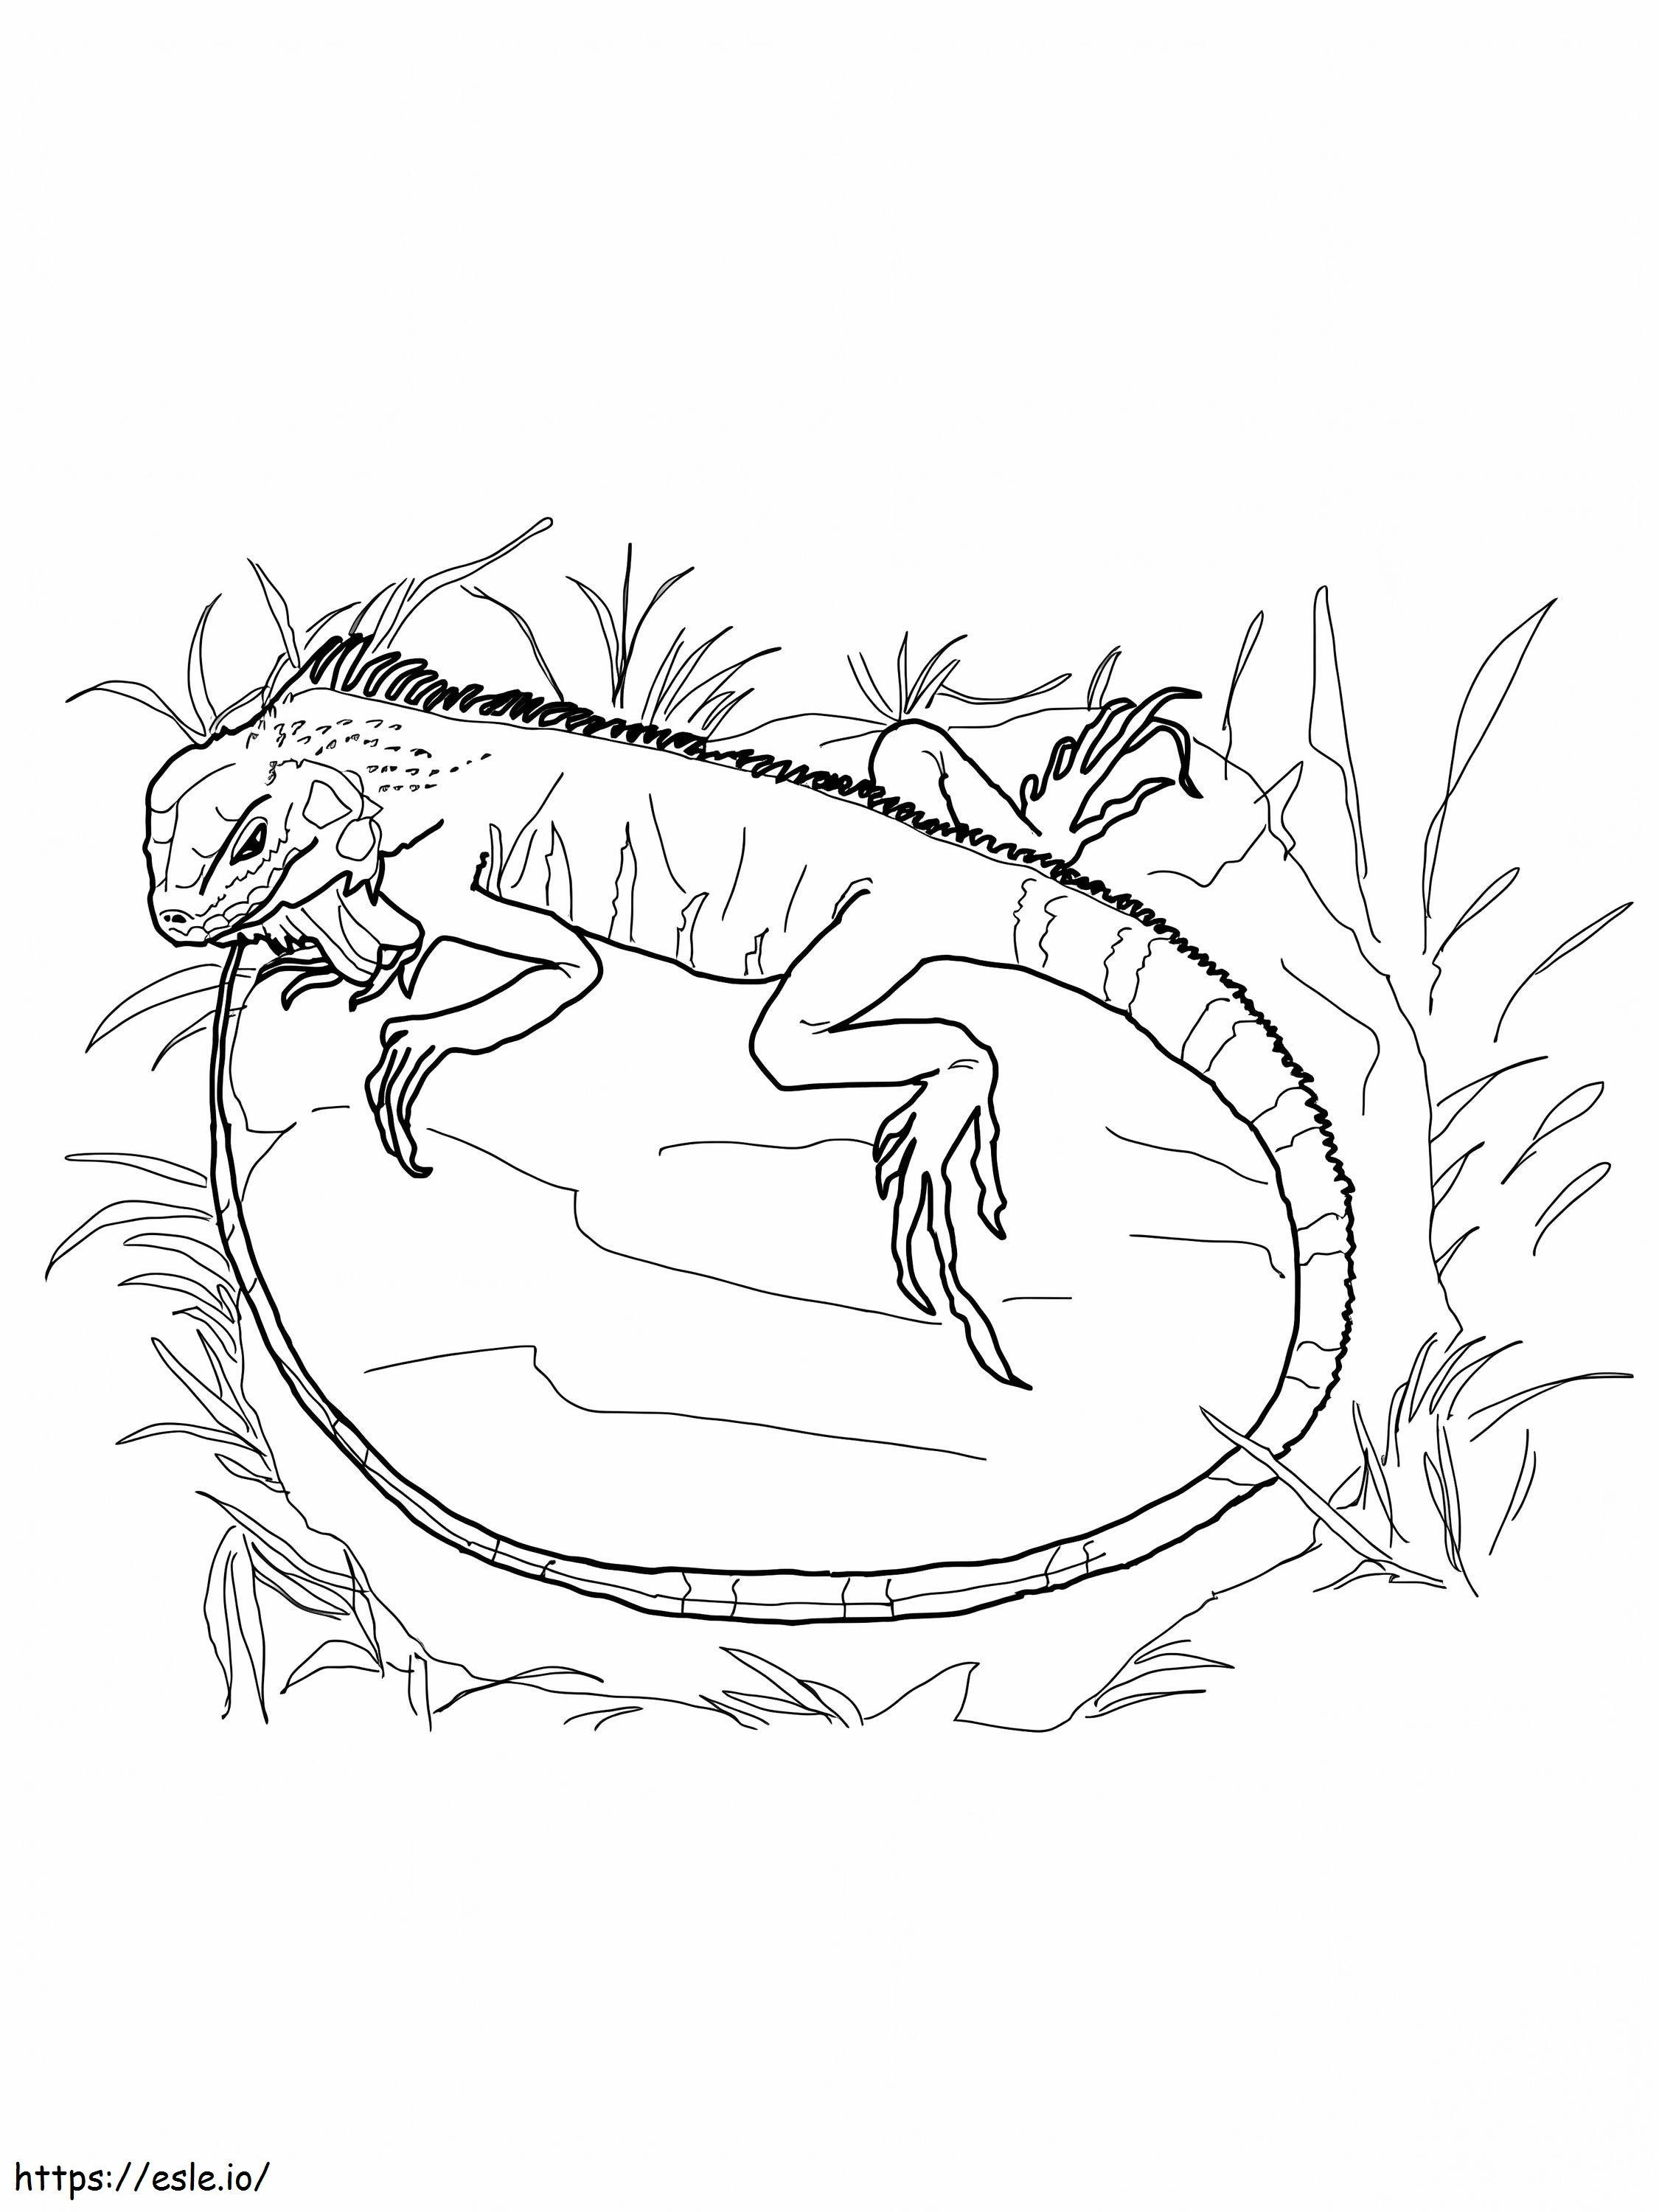 Iguana On A Grass coloring page